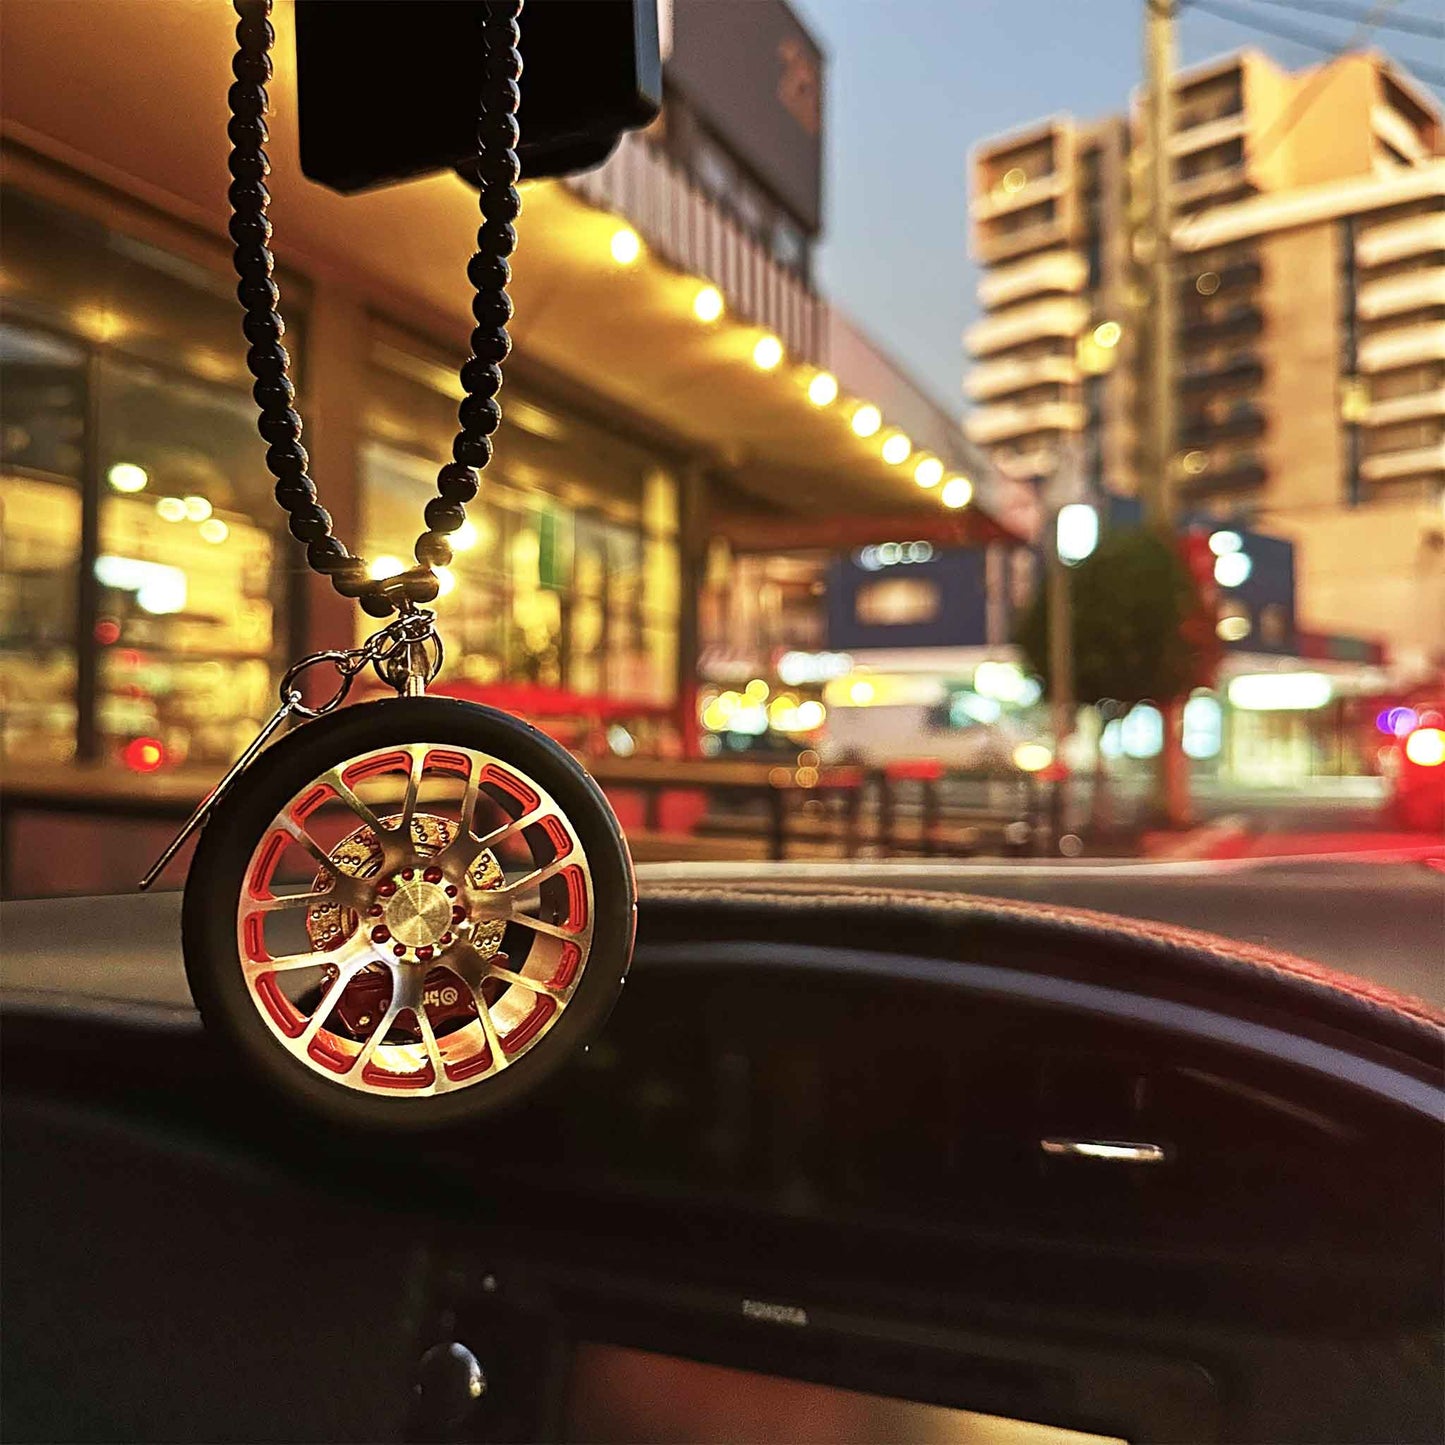 A red BBS air-freshener hung on a car's rear mirror, with well-lit but blurred street views at the background